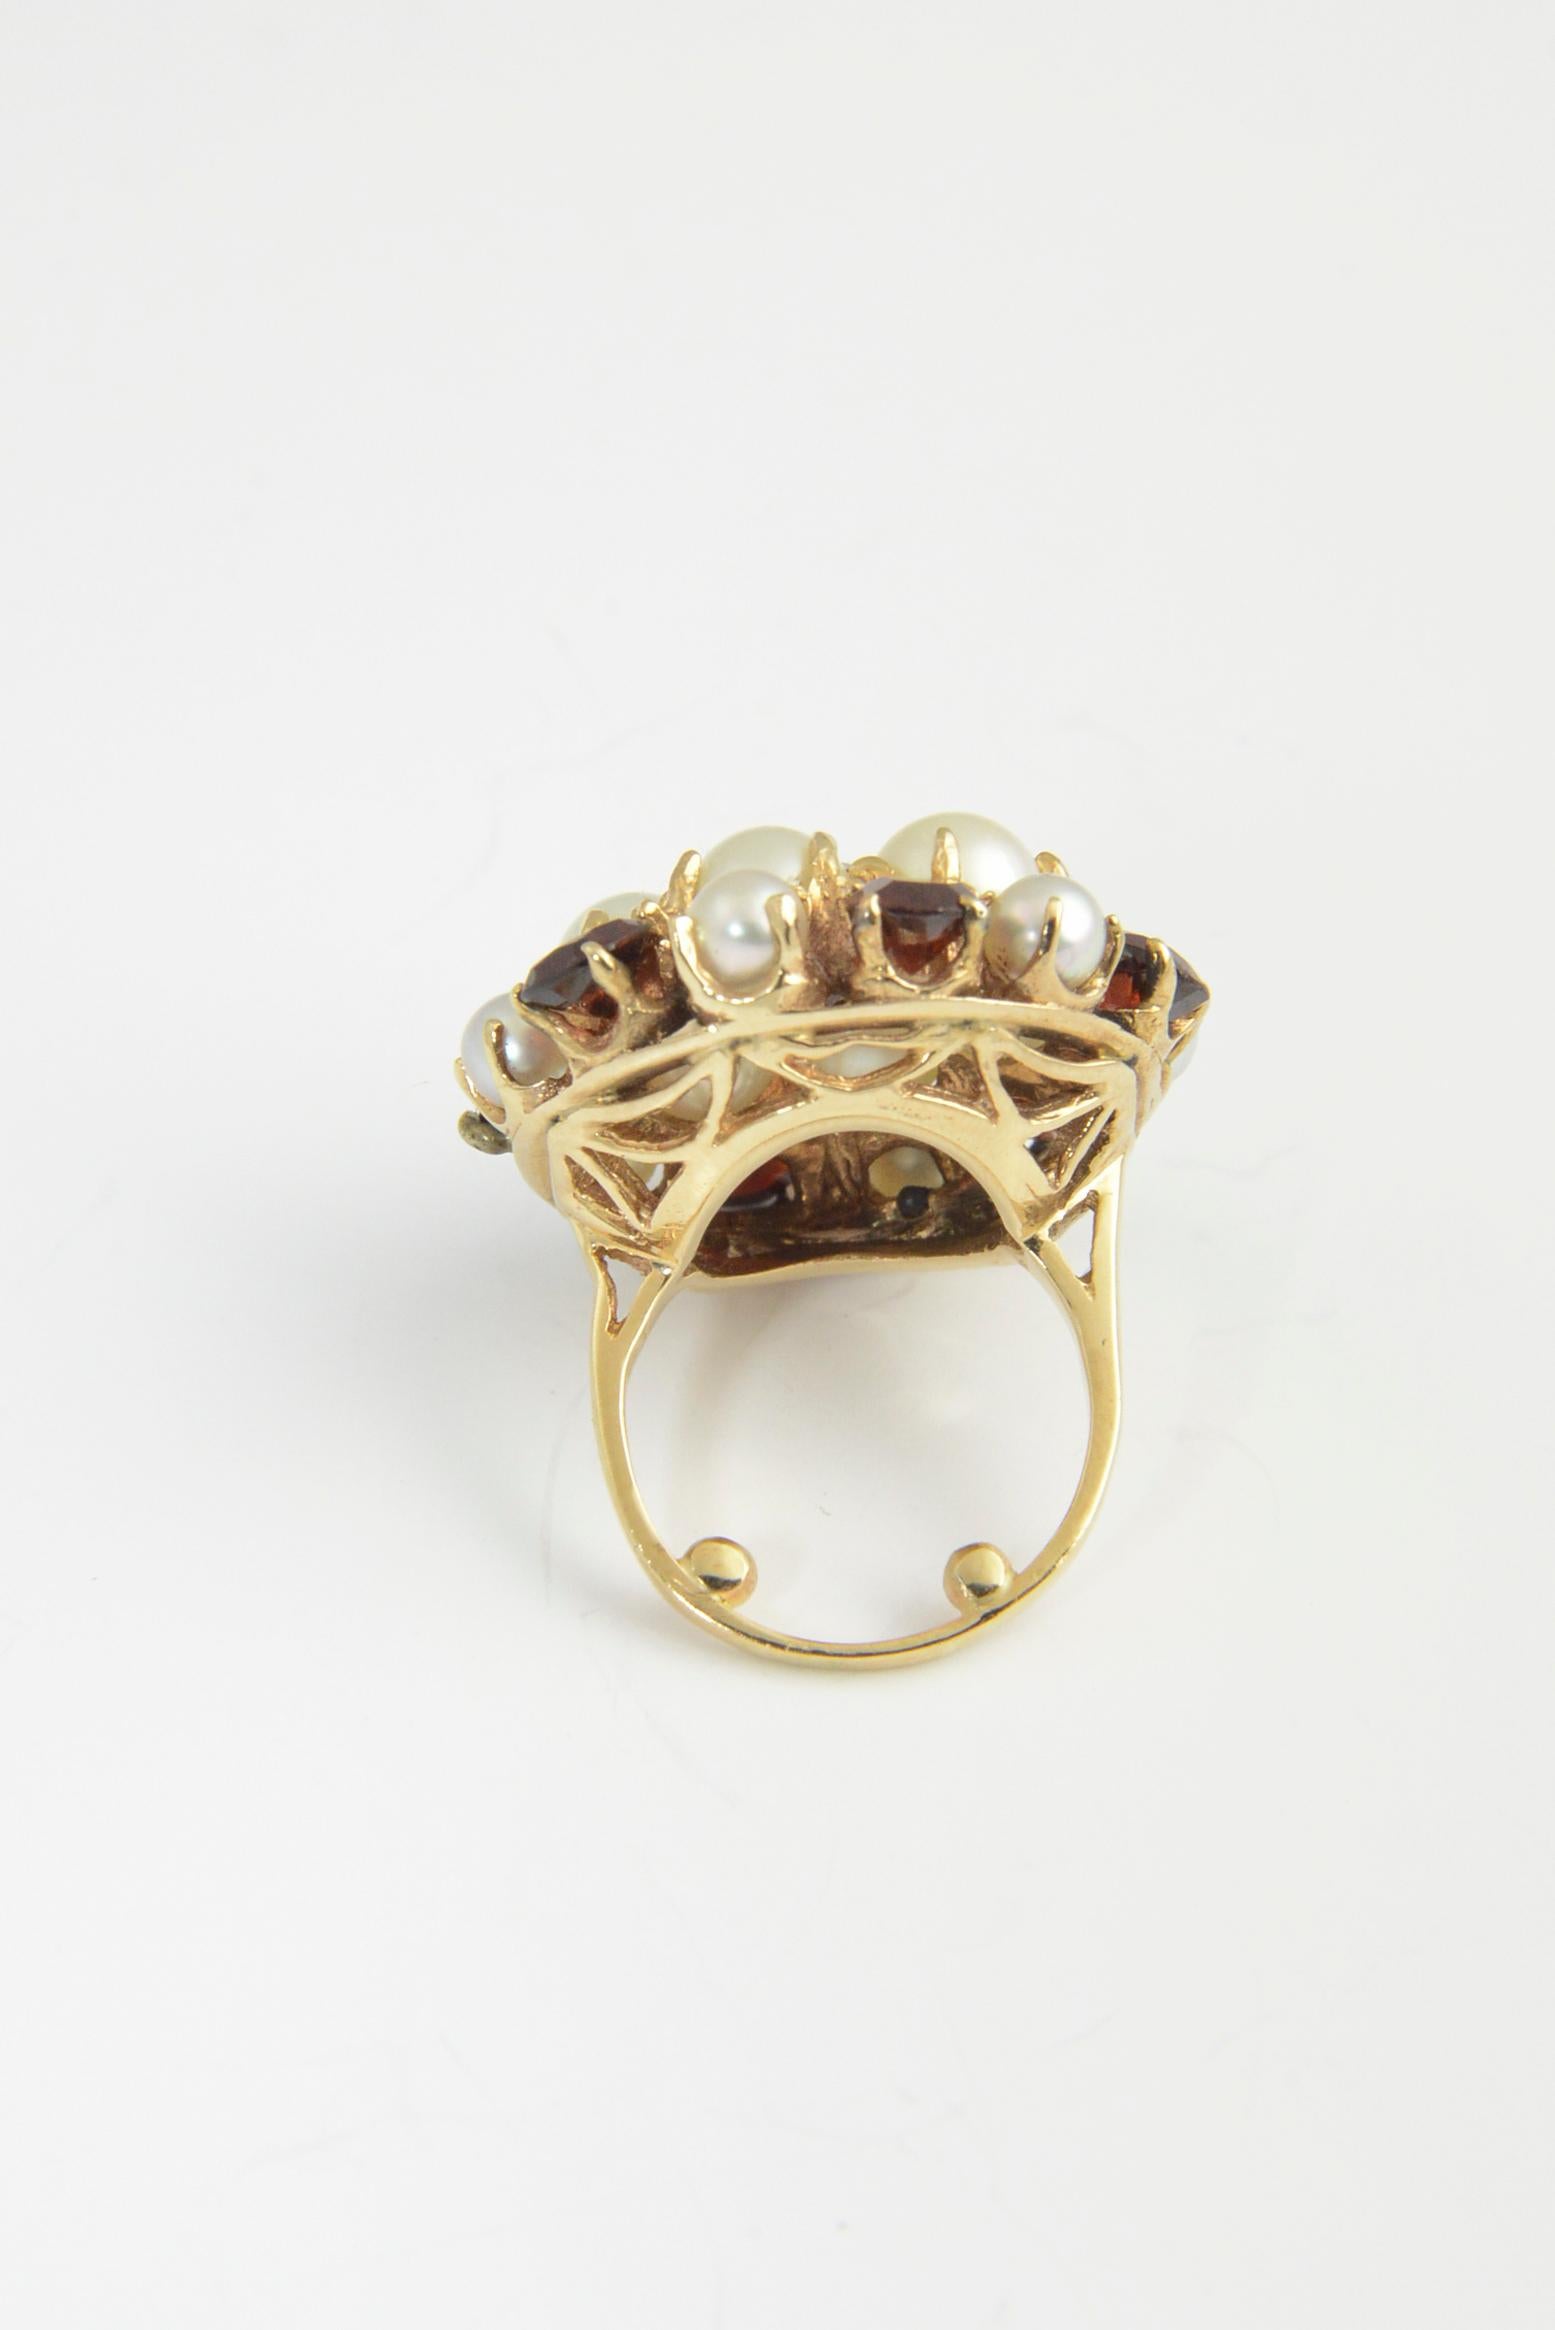 Women's 1950s Garnet and Pearl Yellow Gold Dome Ring